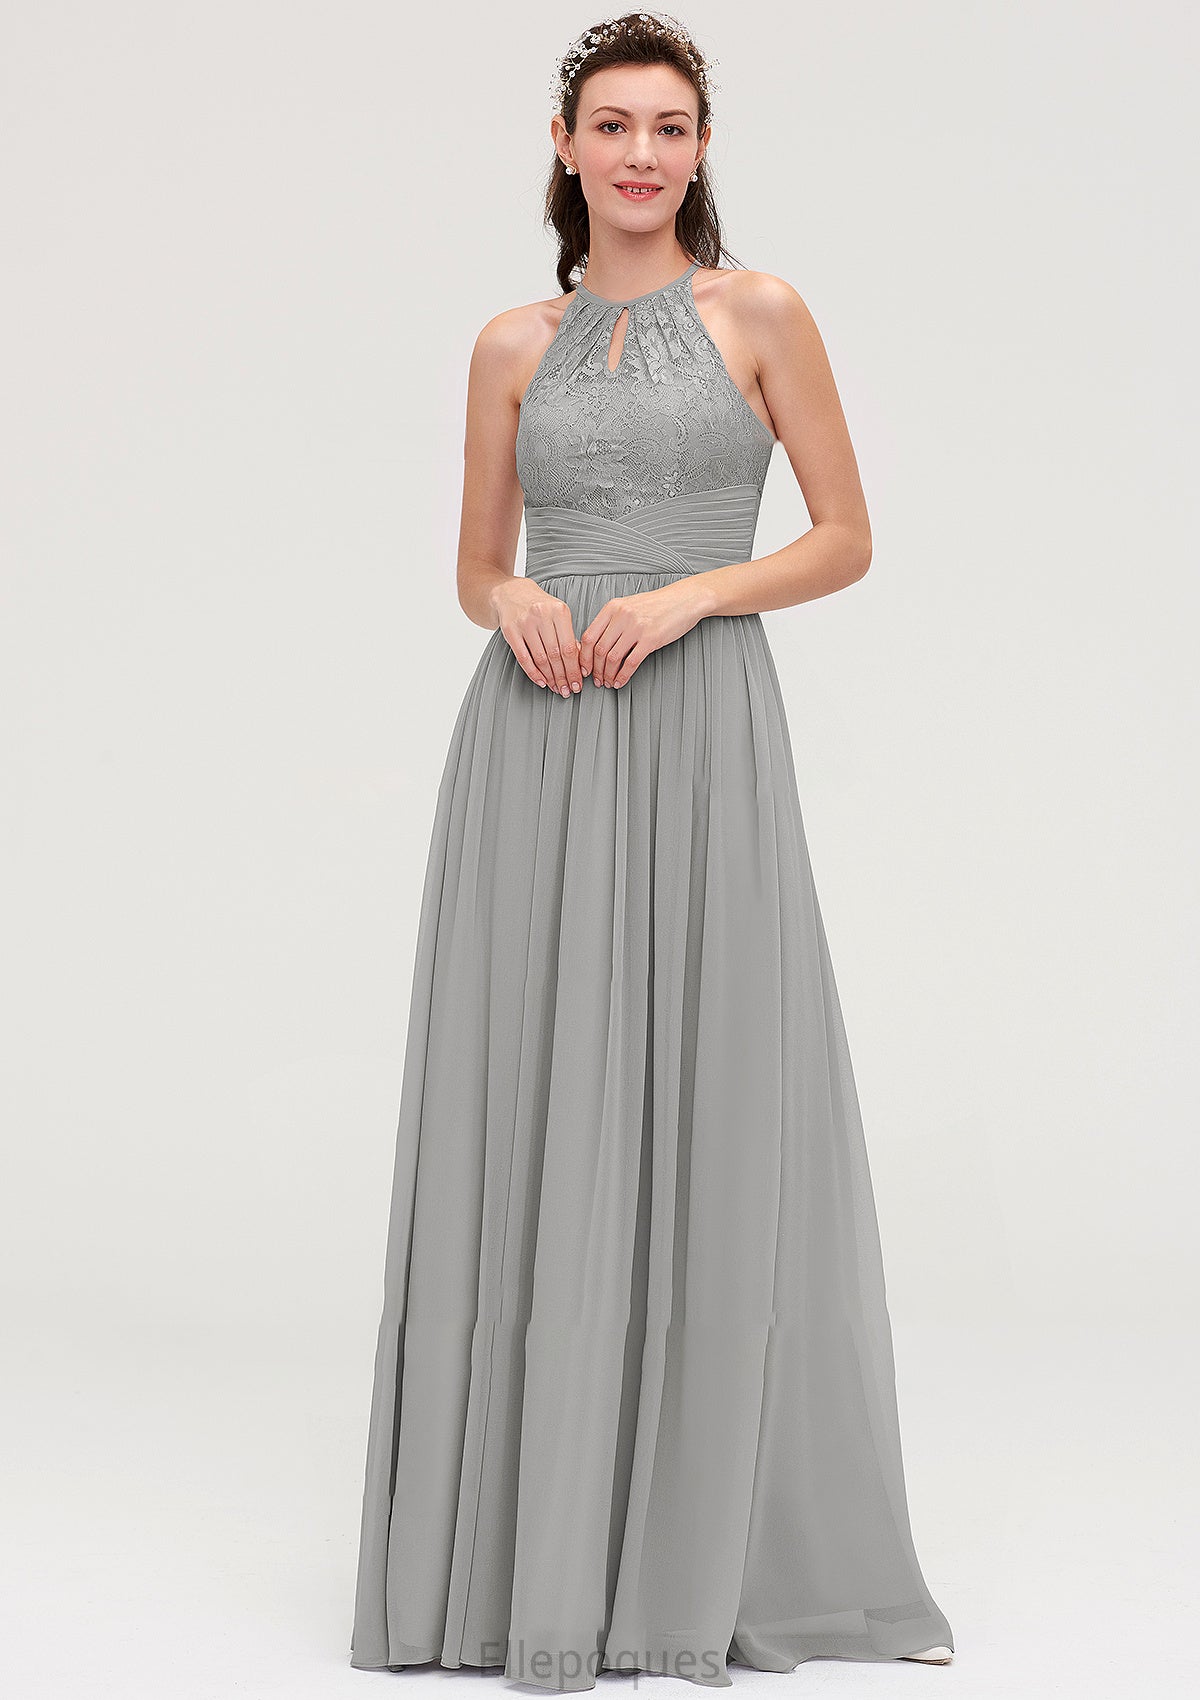 Sleeveless Scoop Neck Chiffon A-line/Princess Long/Floor-Length Bridesmaid Dresseses With Pleated Lace Lauretta HOP0025460